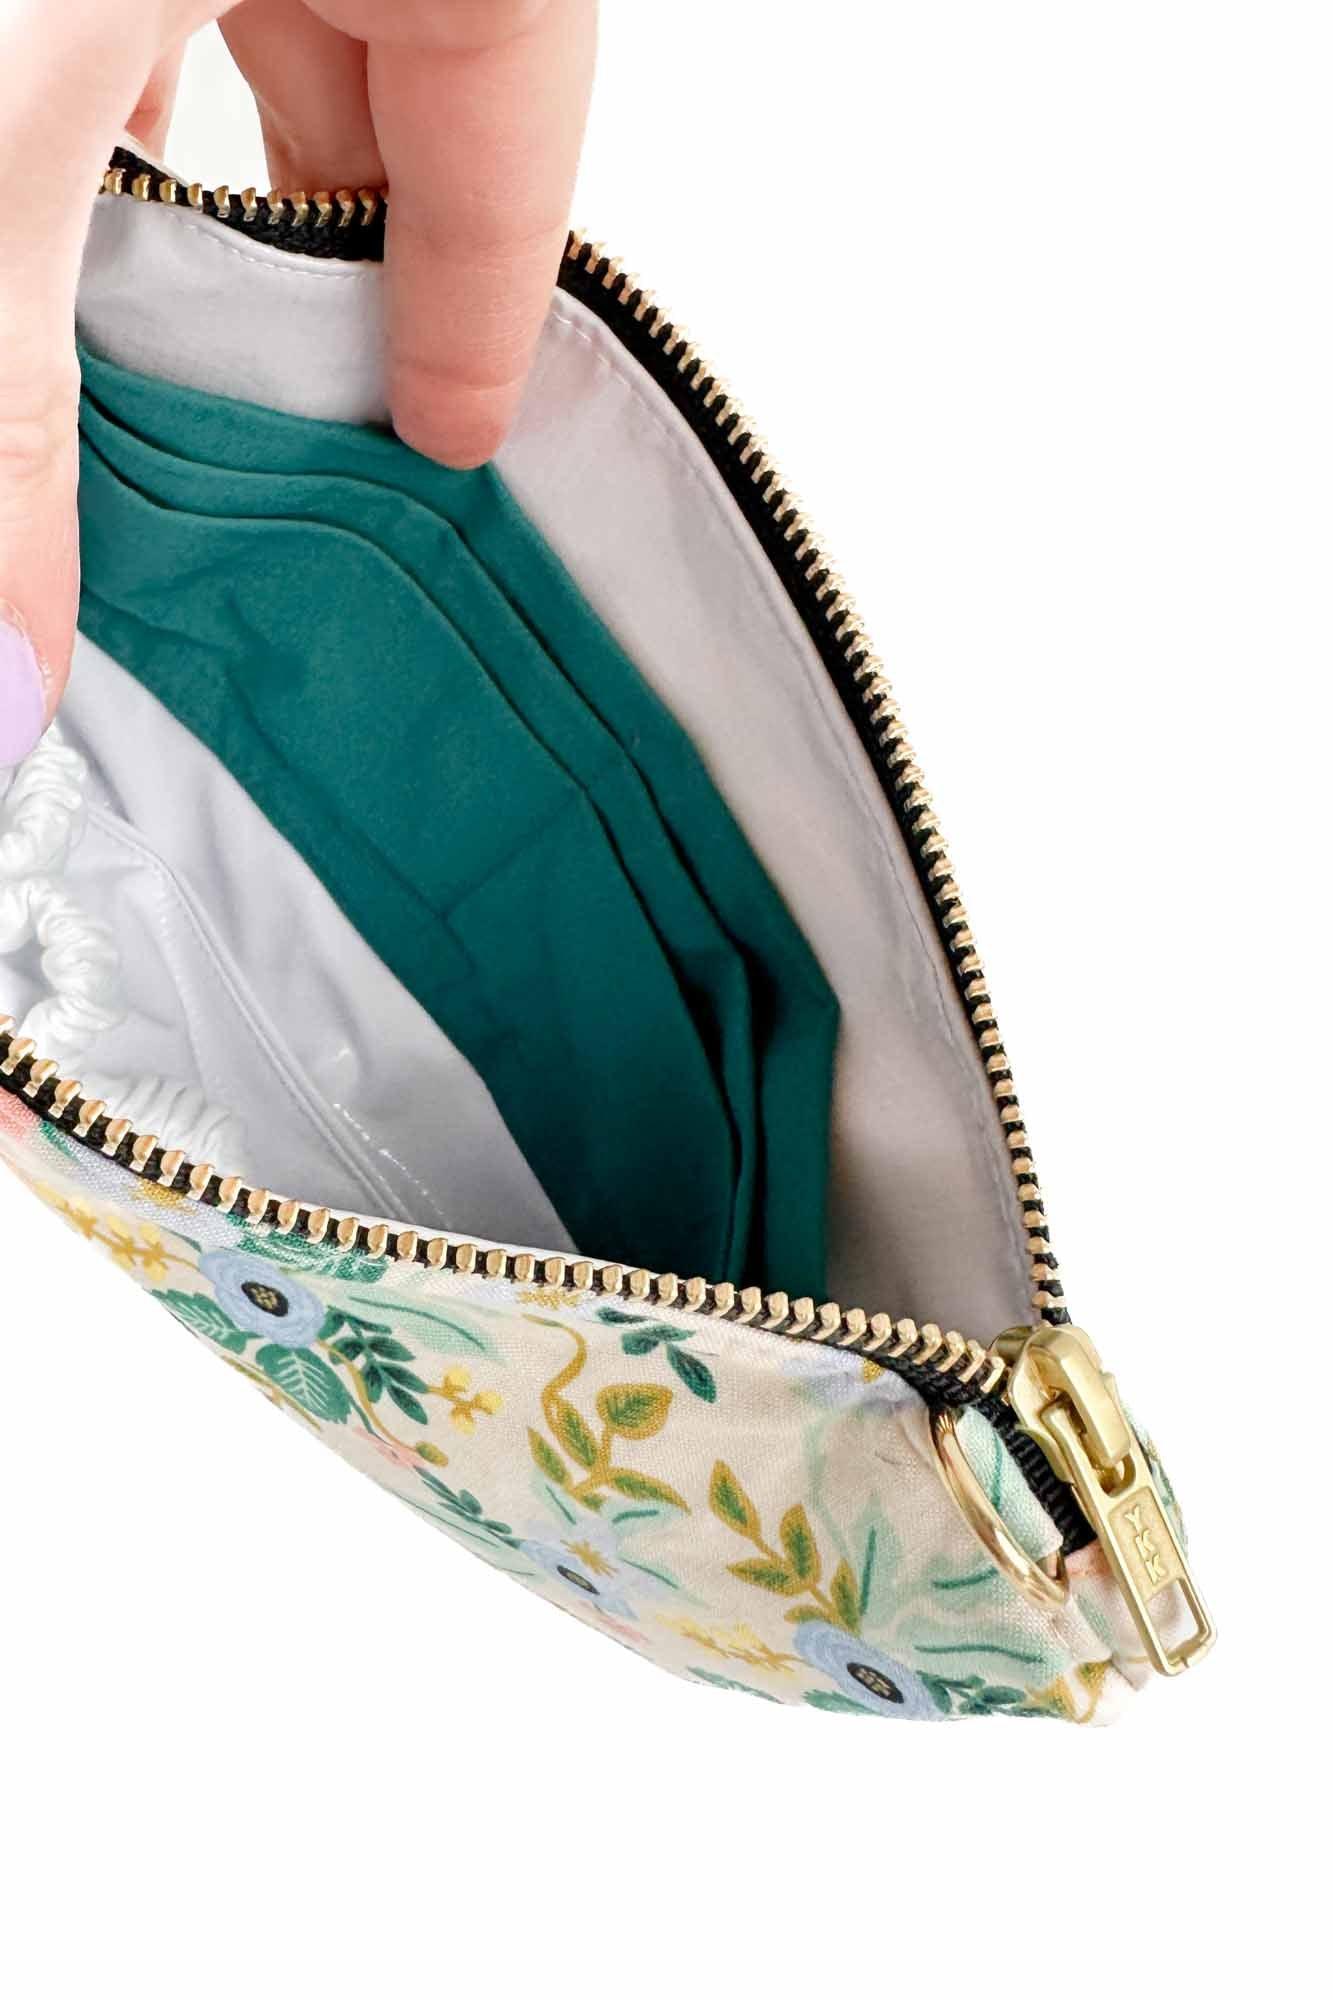 Primavera Convertible Crossbody Wristlet+ with Compartments READY TO SHIP - Modern Makerie